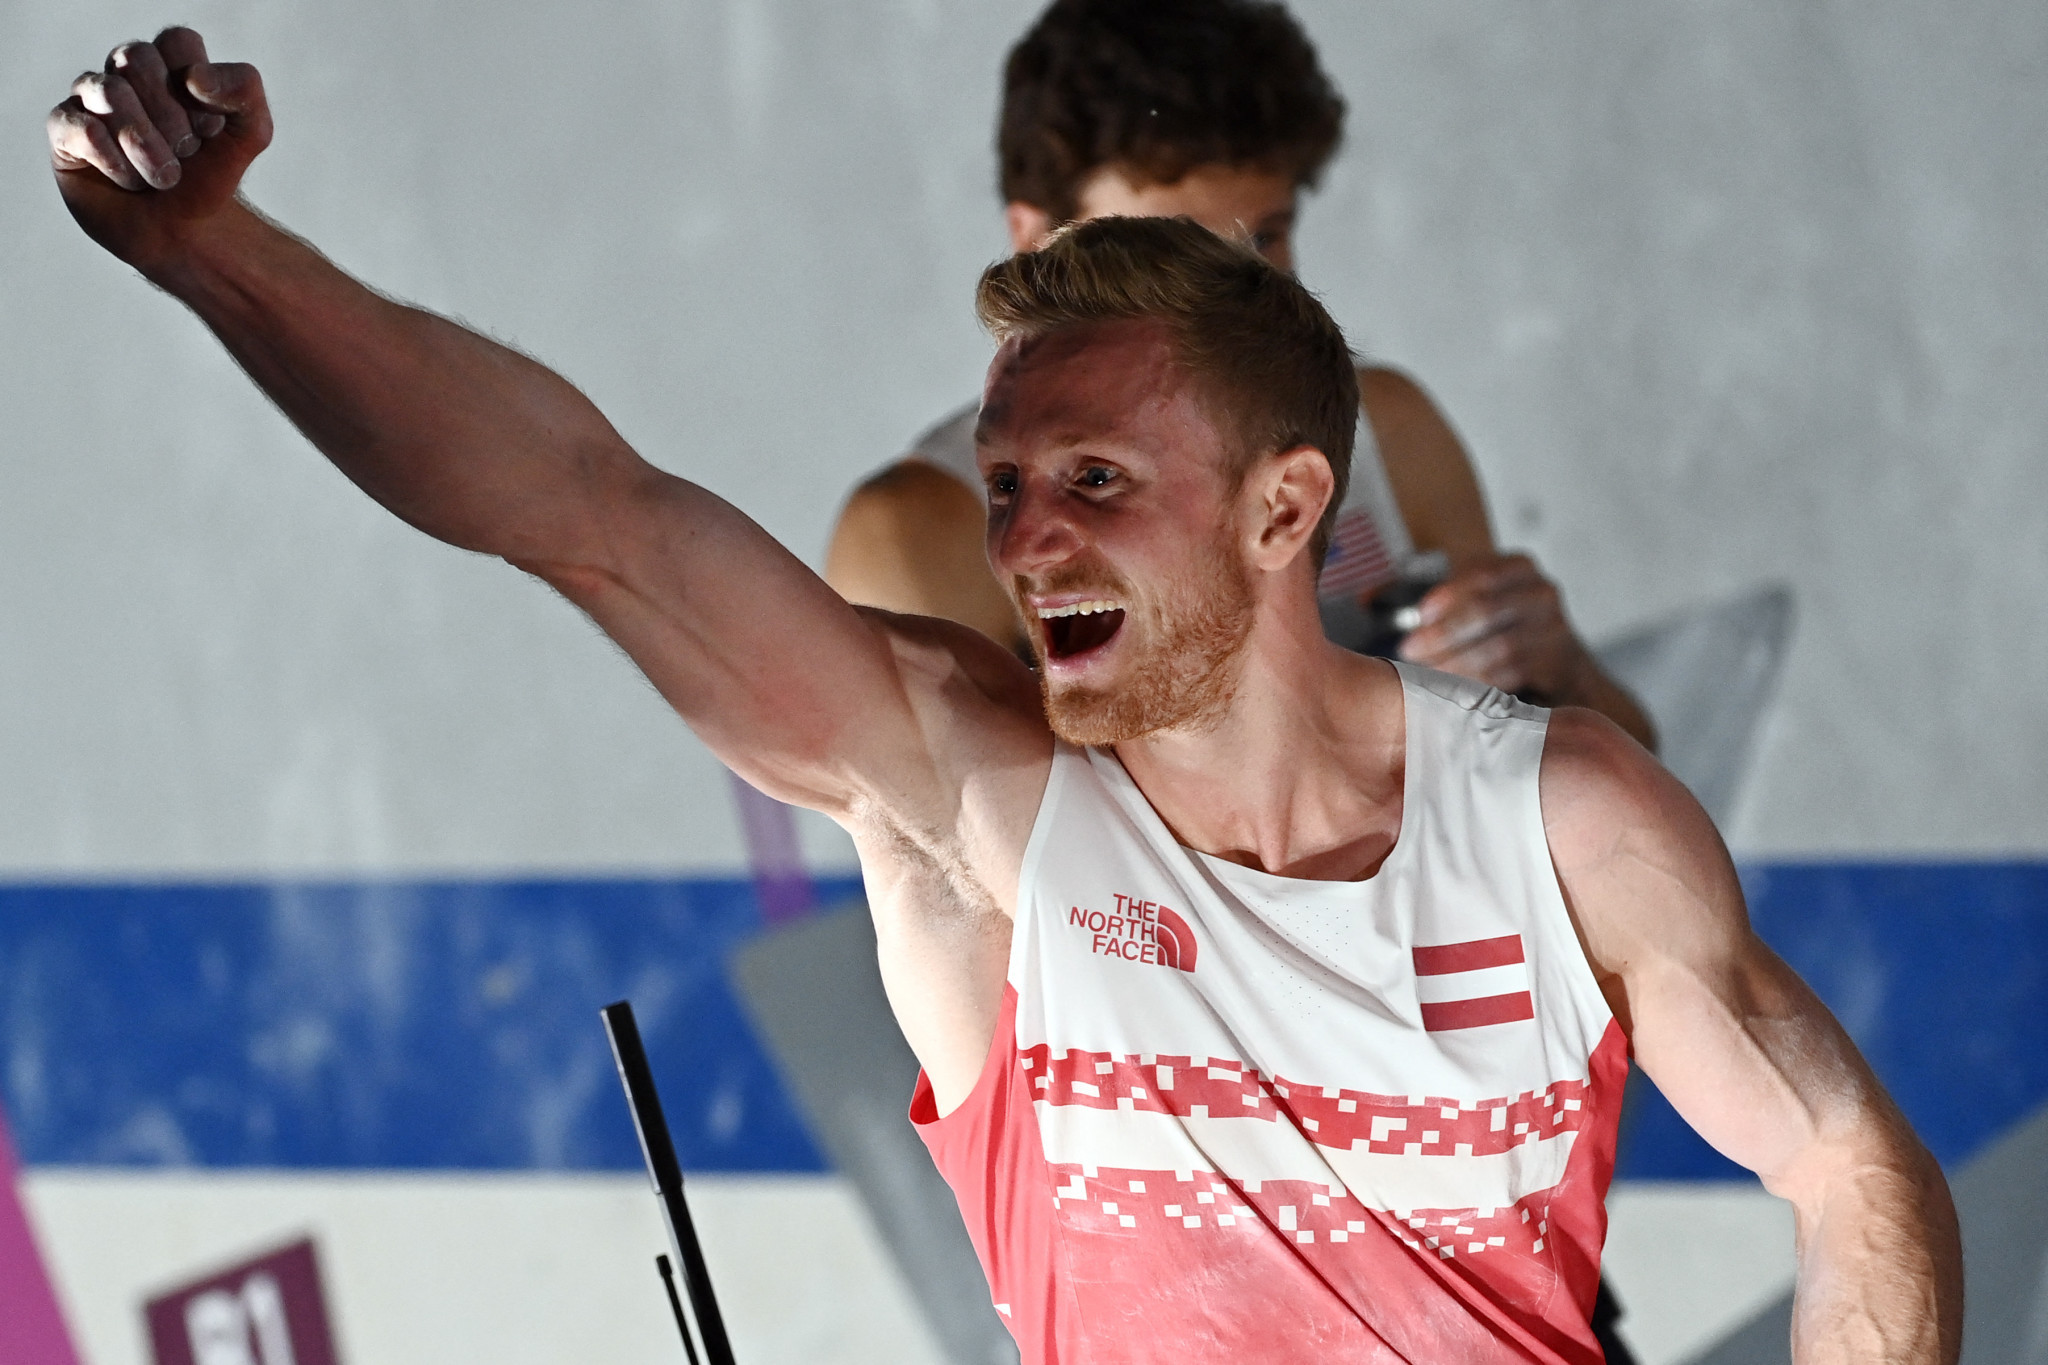 Schubert and Seo win lead golds on final day of IFSC Climbing World Championships